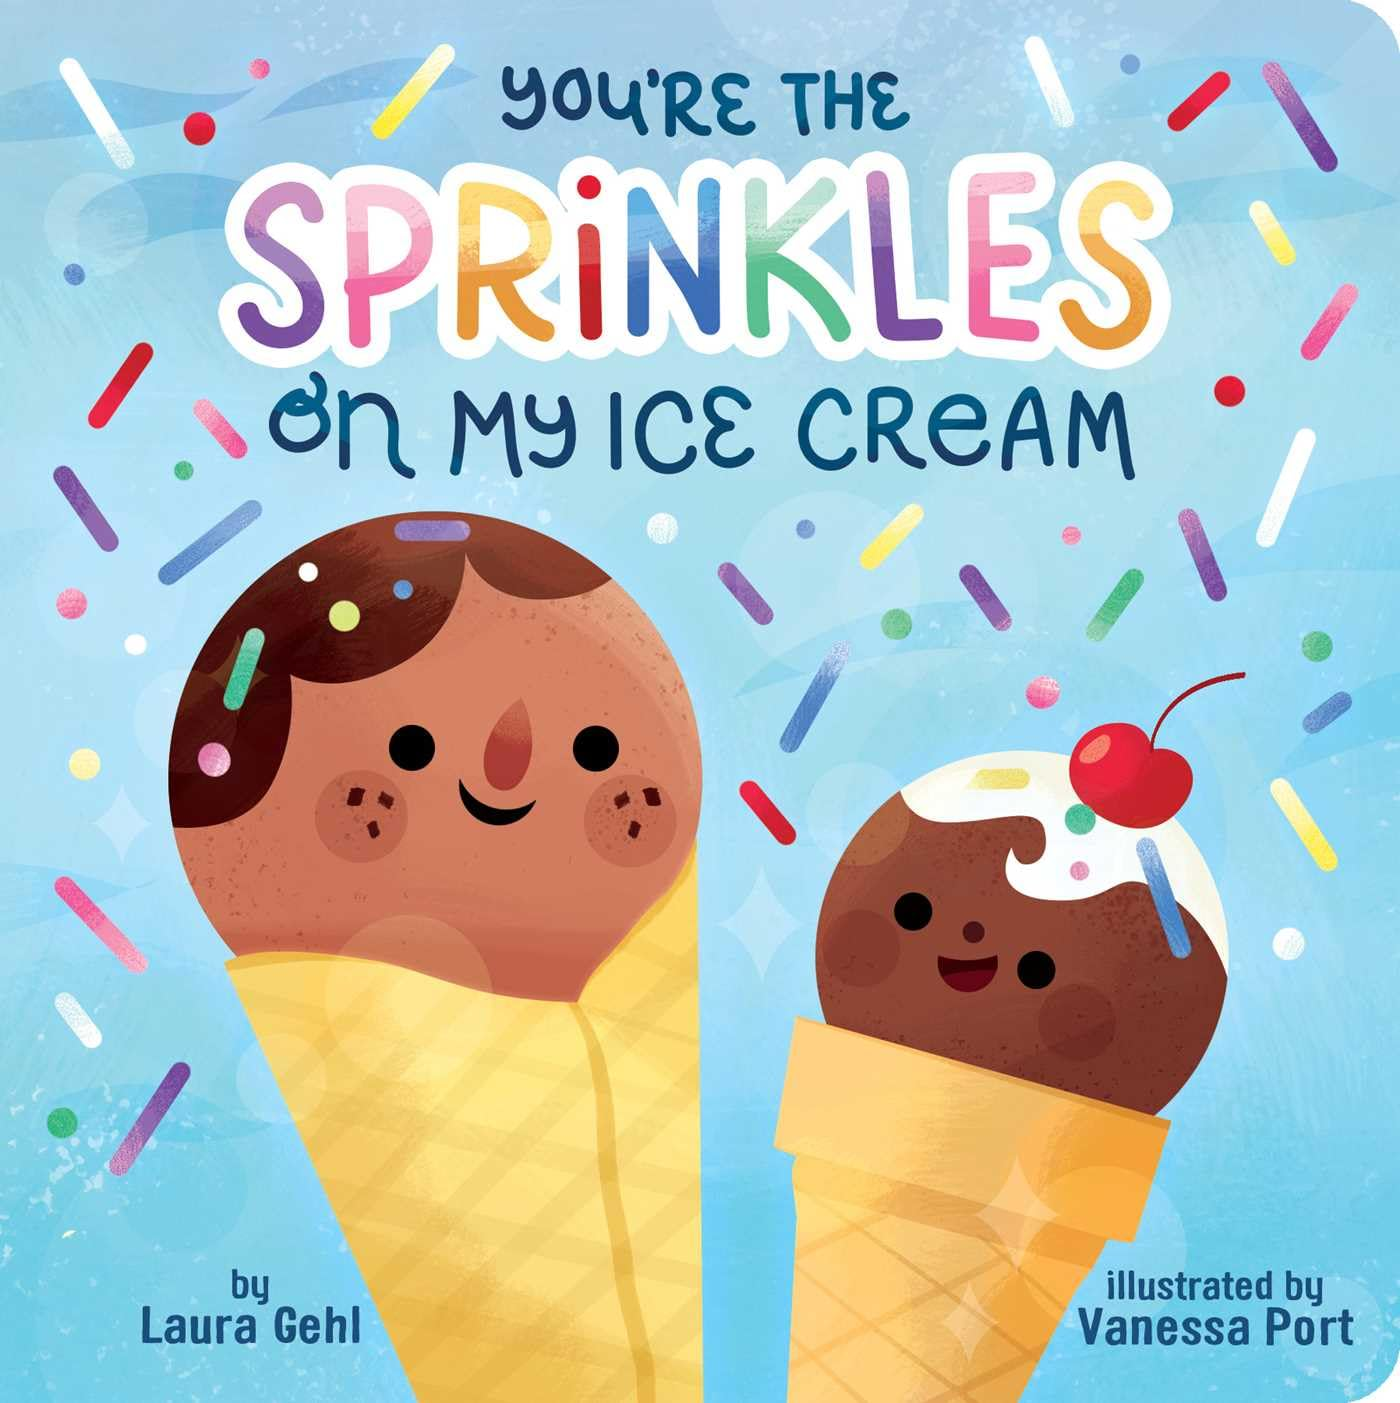 Book - You're the Sprinkles on my ice cream